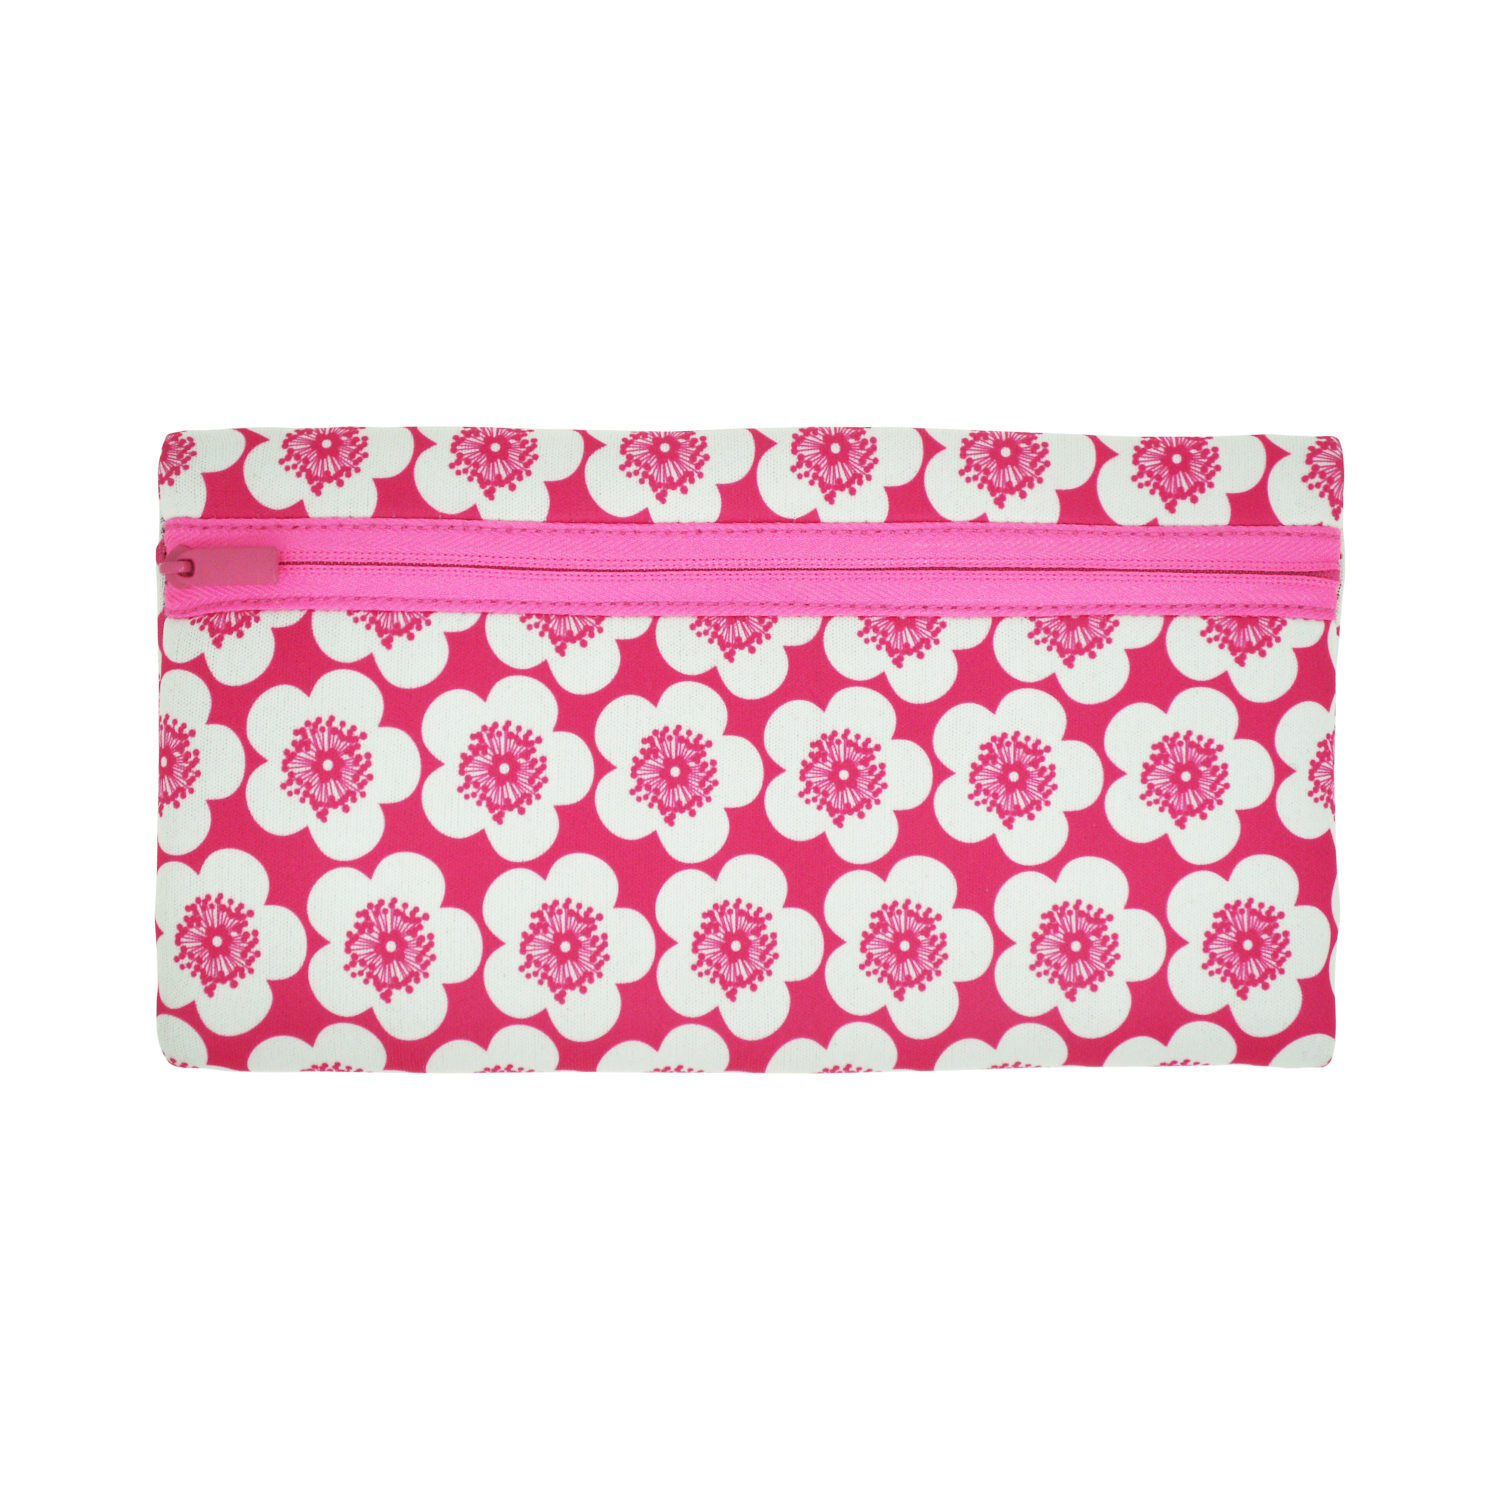 Neoprene Pencil Case with All-Over Print